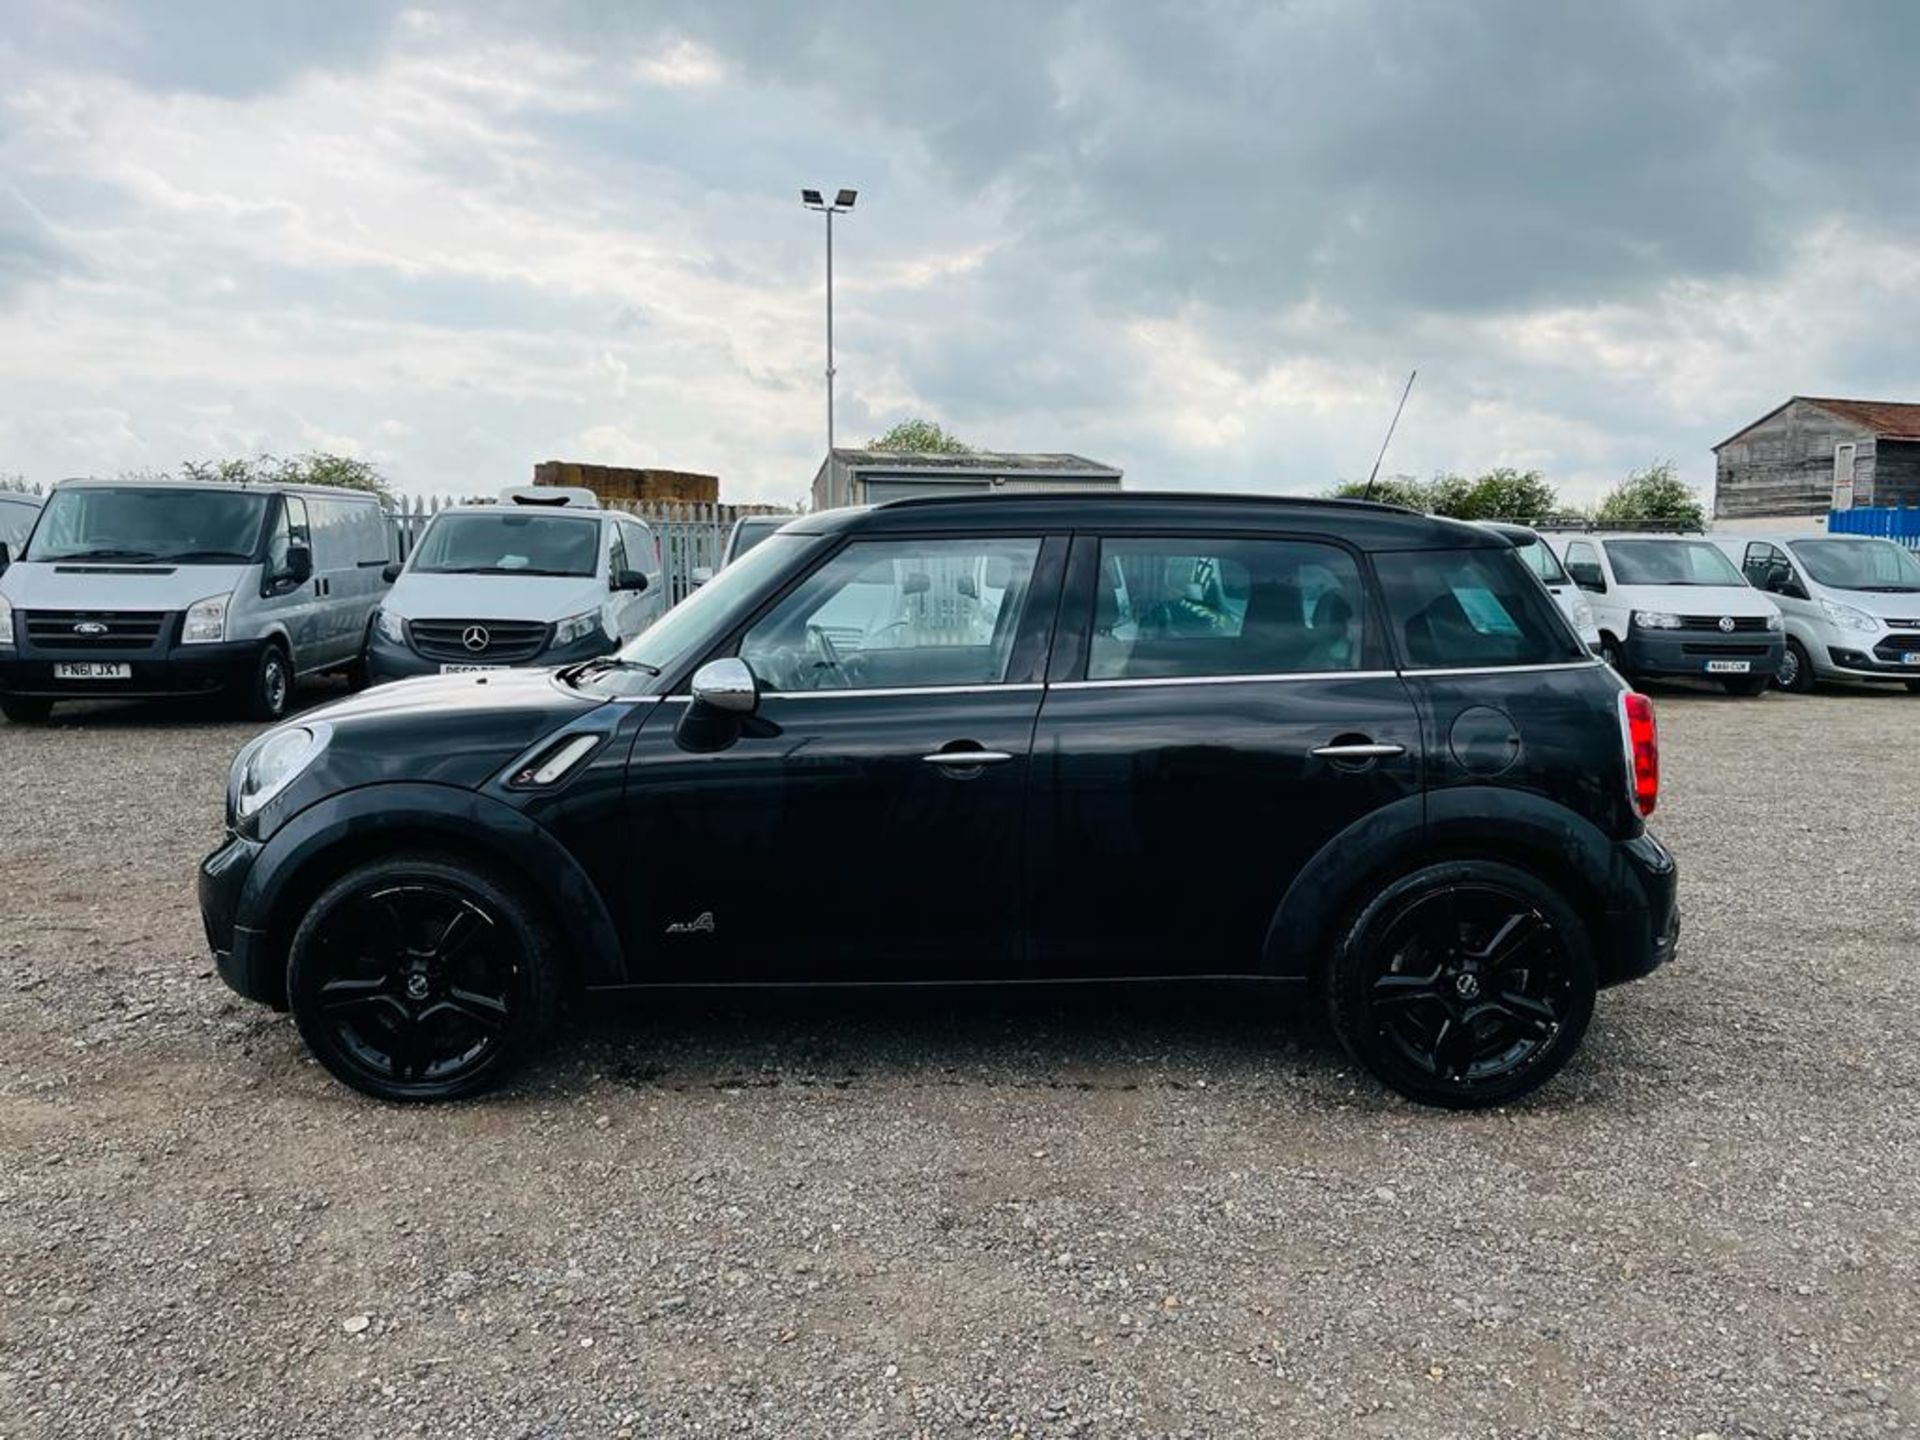 **ON SALE** Mini Cooper Countryman All4 SD 2.0 2011 "61 Reg" - Start/Stop - Alloy Wheels -Navigation - Image 4 of 25